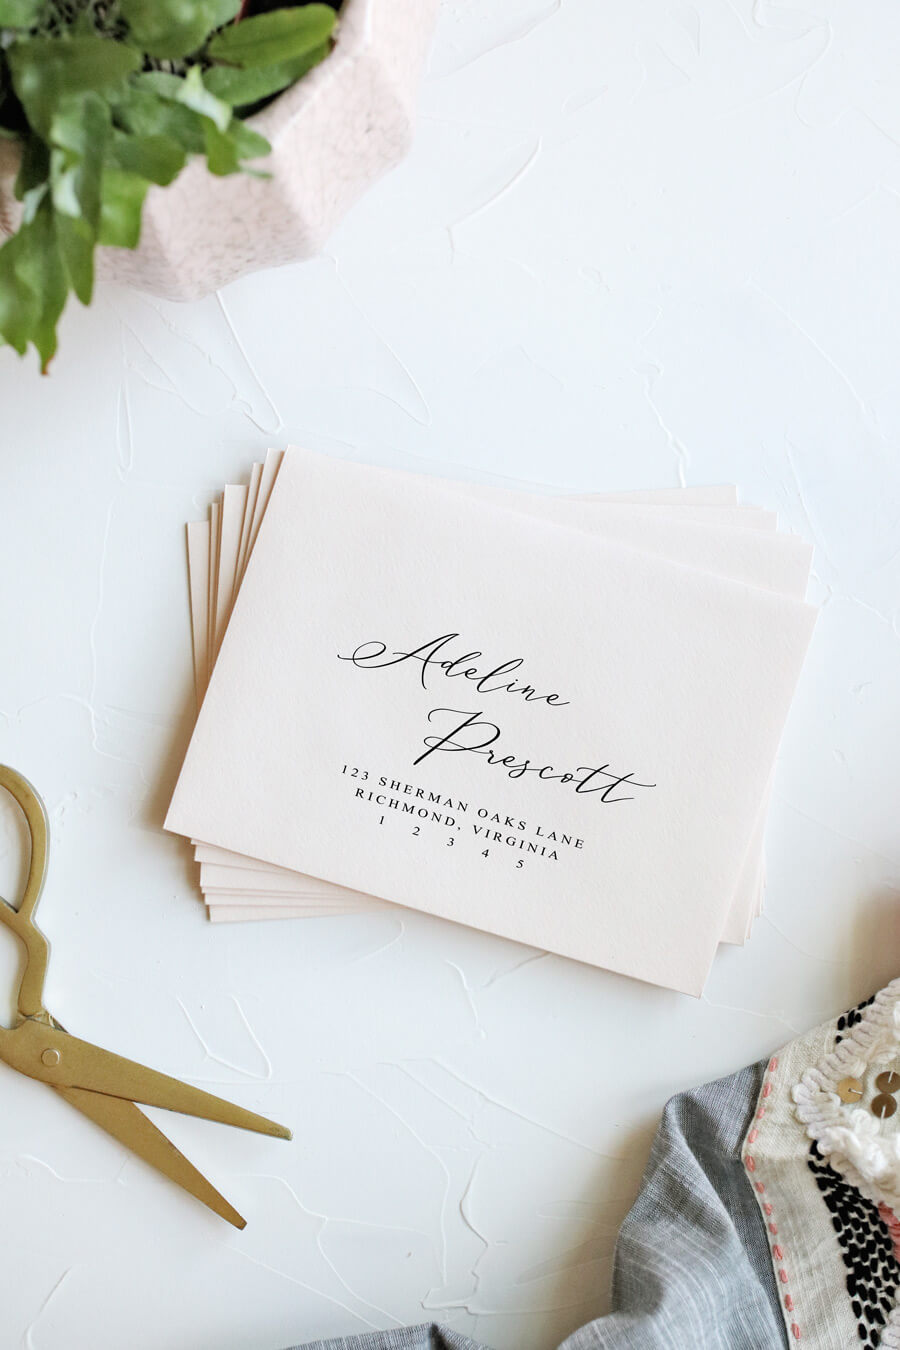 How To Print Envelopes The Easy Way | Pipkin Paper Company Throughout Paper Source Templates Place Cards